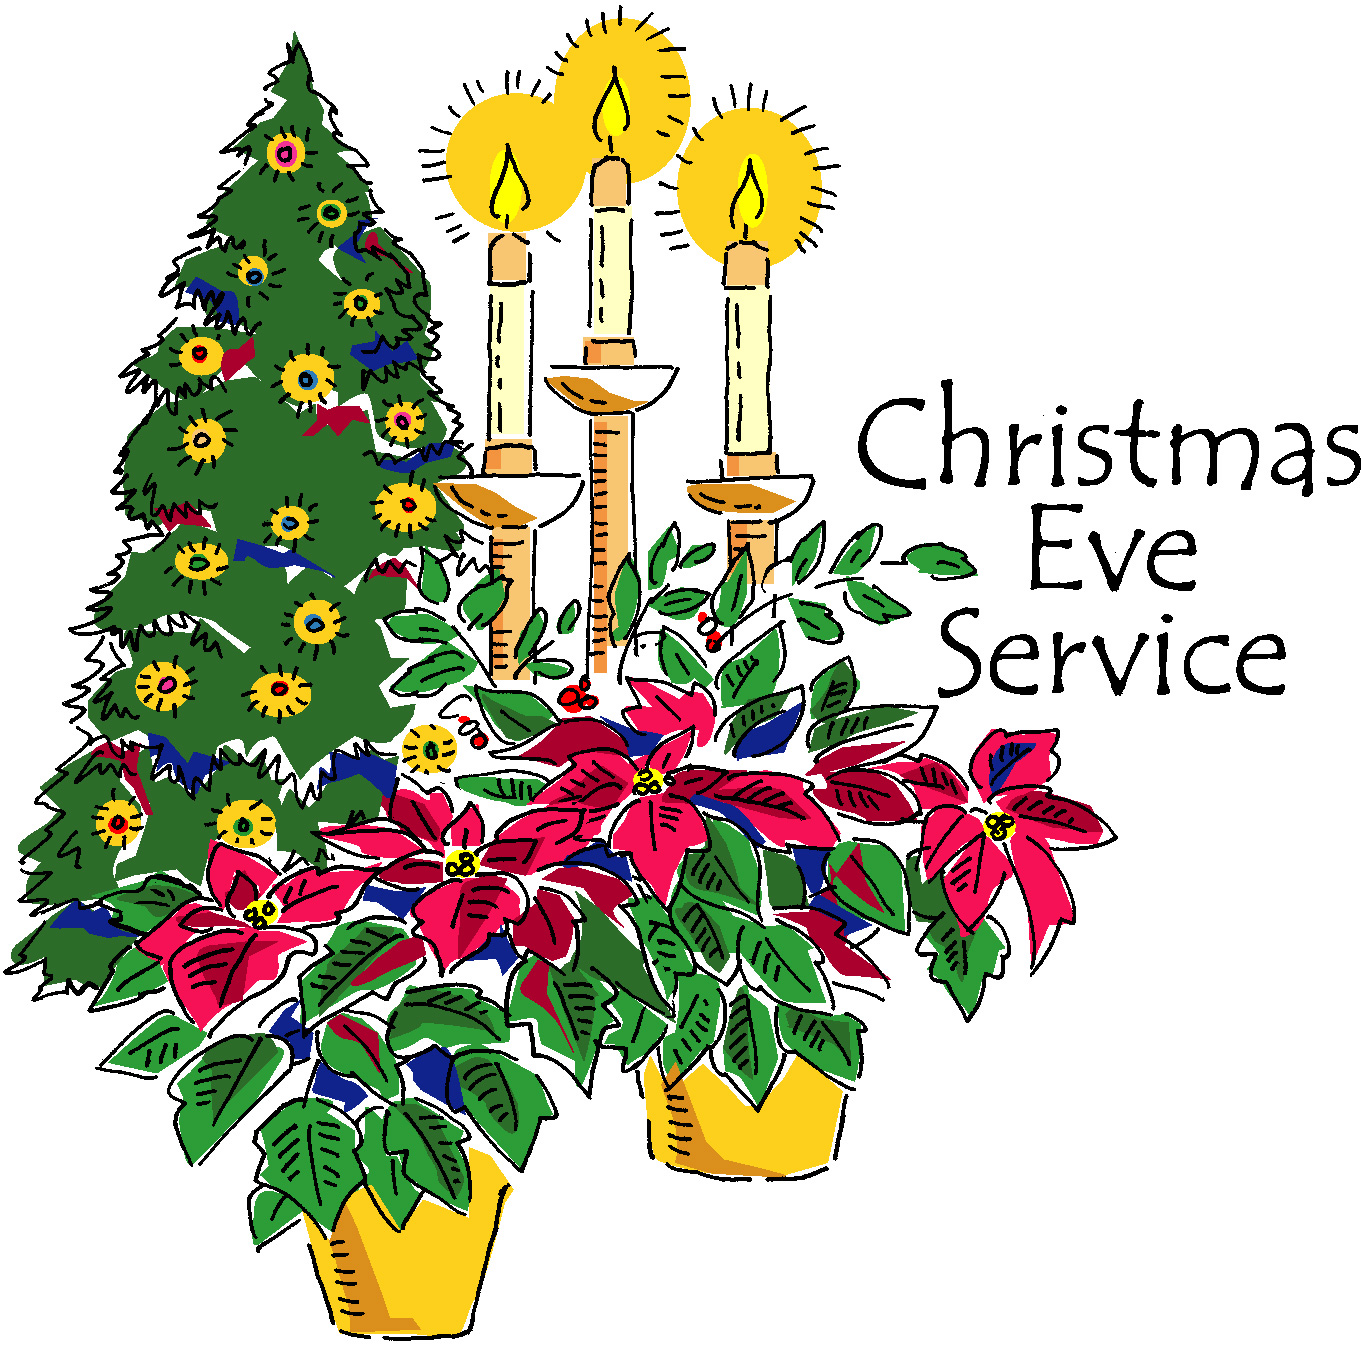 Clip Arts Related To : clip art christmas eve candlelight service. vi...